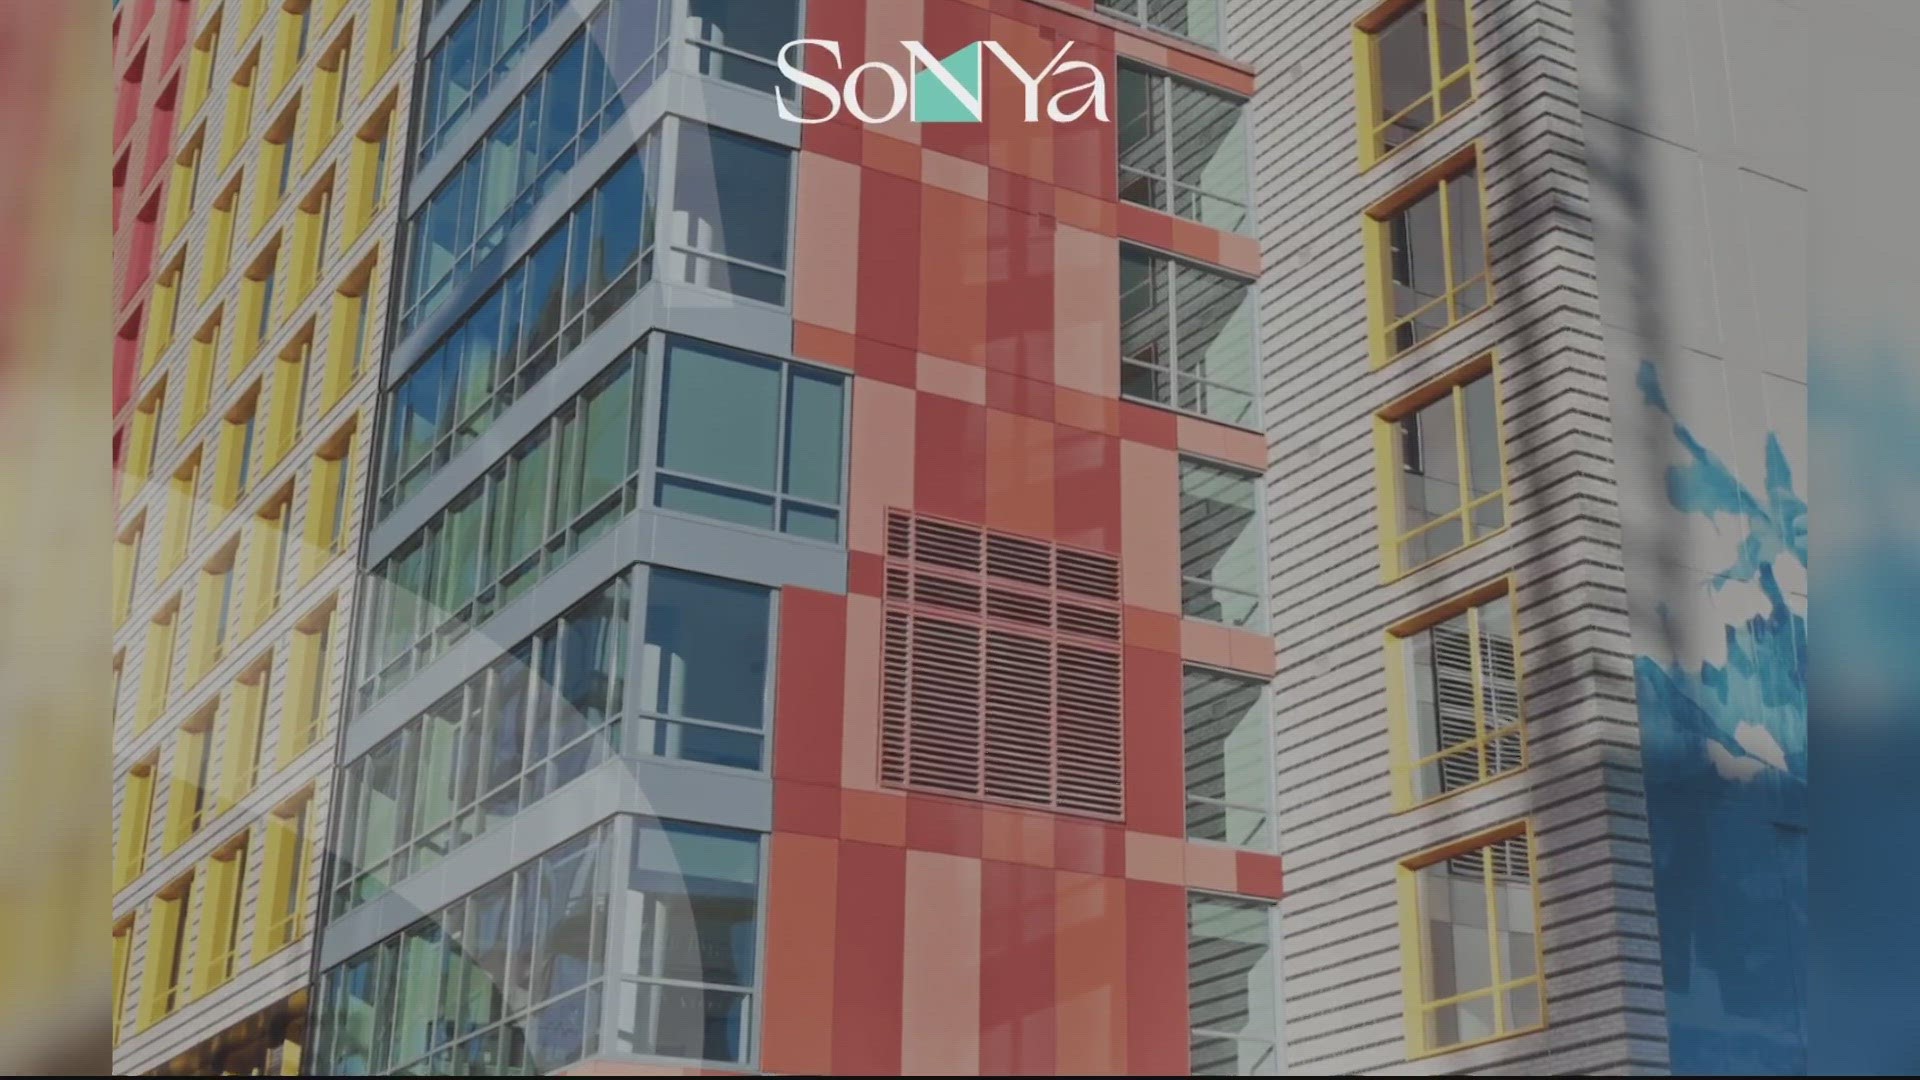 SoNYa is inside NOMA, created by a real estate company.